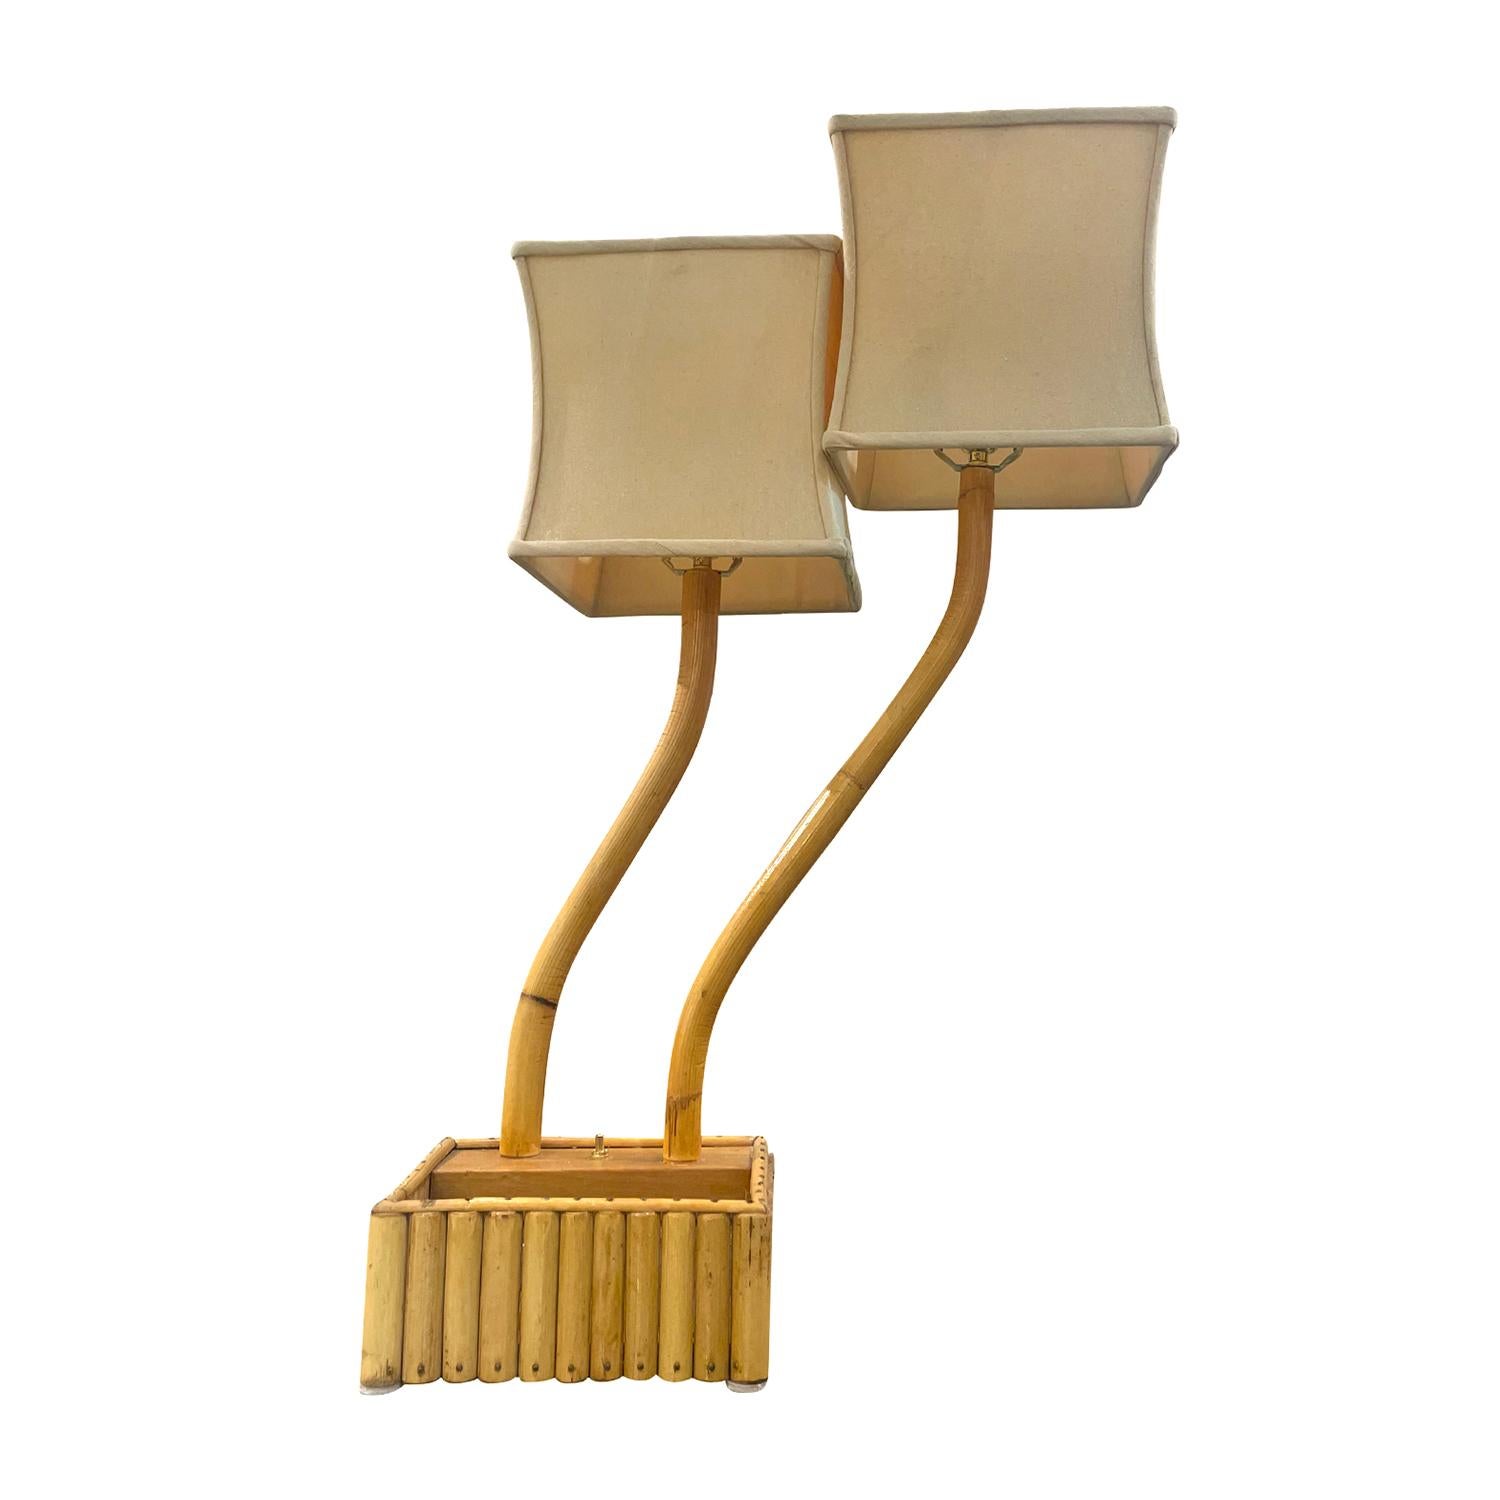 A vintage Mid-Century modern Italian double arm table lamp with a light-brown adjustable rectangular shade, made of hand crafted bamboo in good condition. Each of the detailed light is composed with an arched stem supported by a wooden base which is